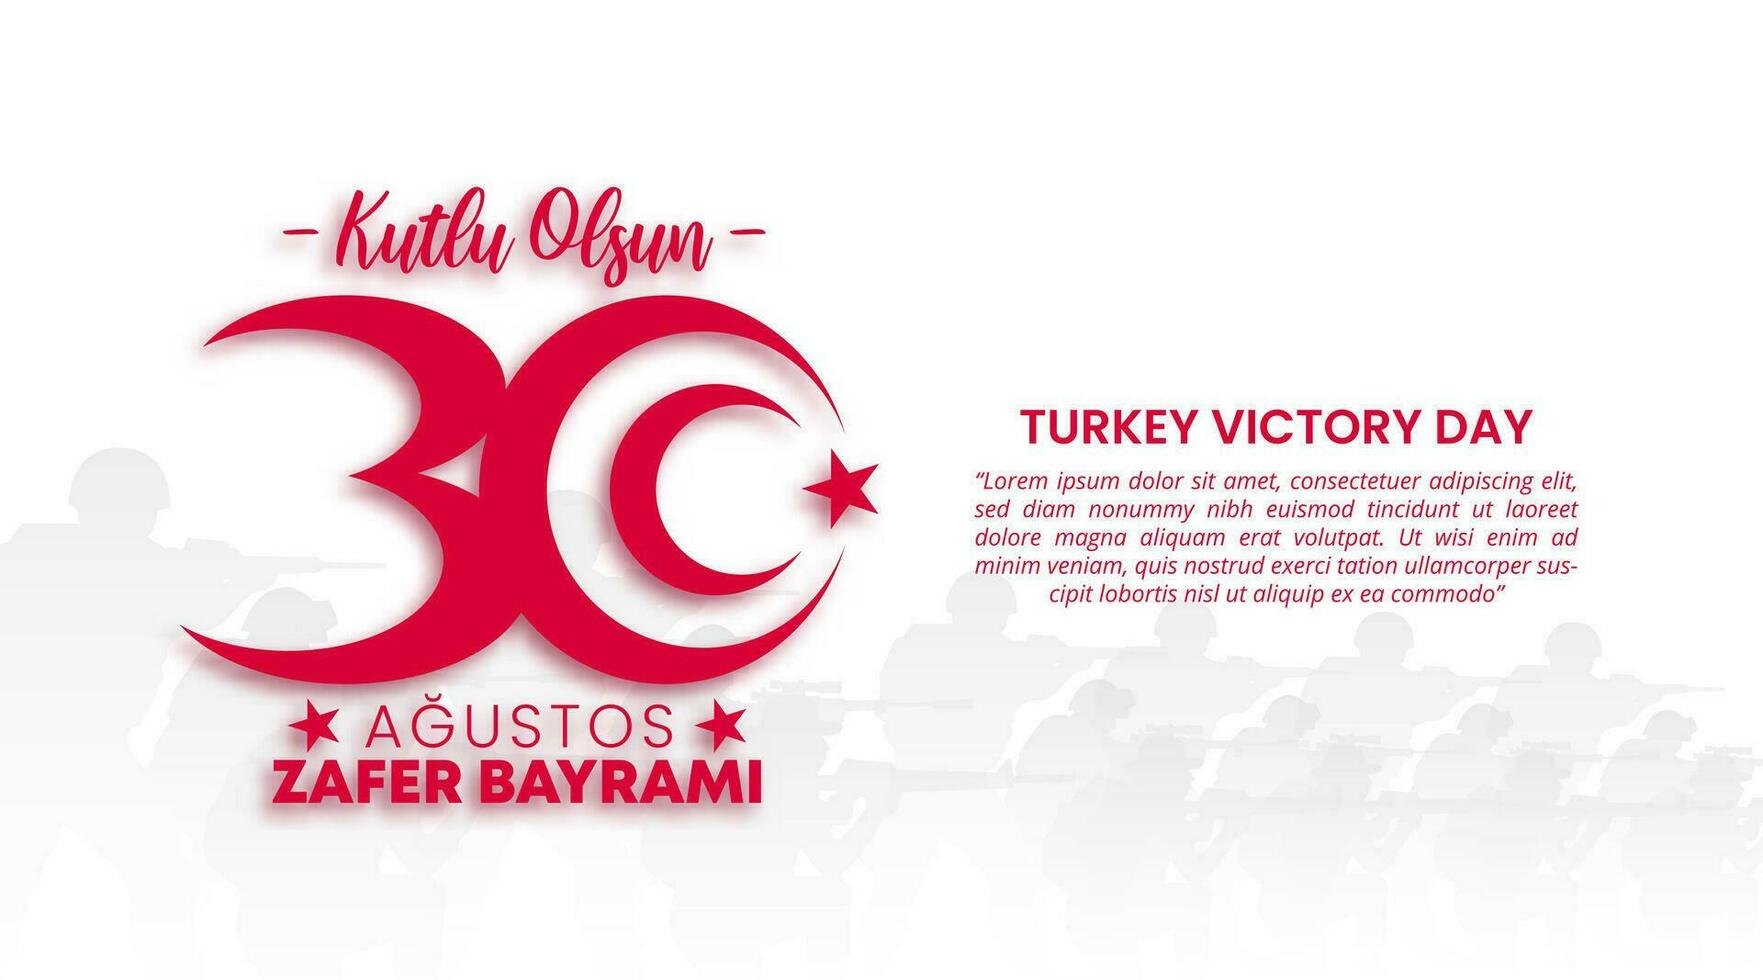 30 Agustos Zafer Bayrami or Turkey victory day background with a cutting paper design style vector